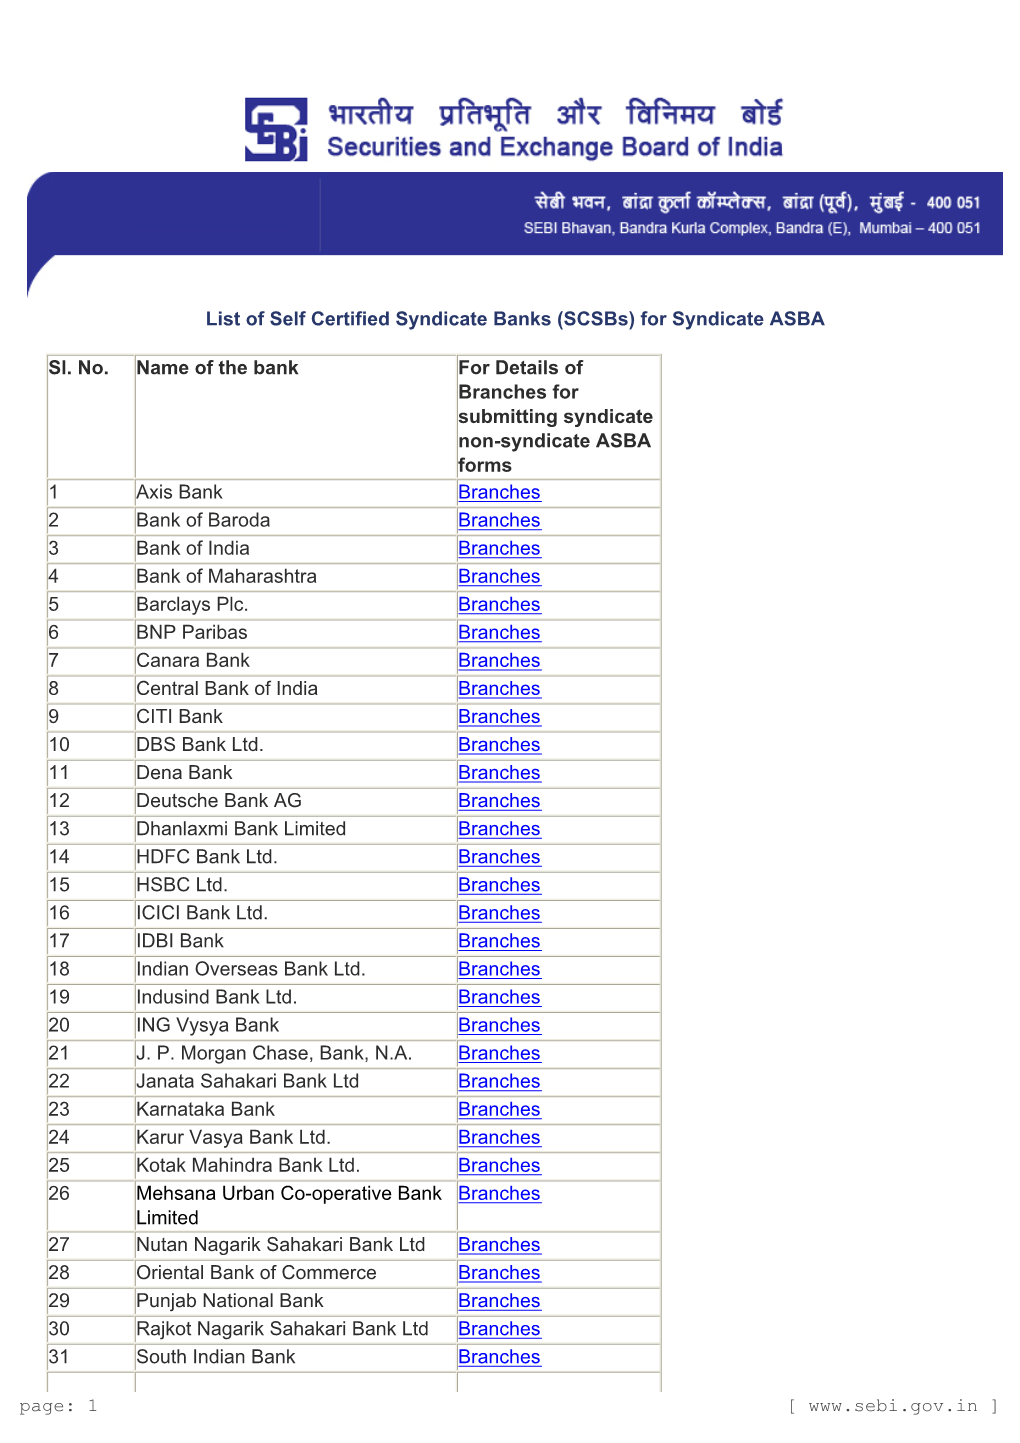 List of Self Certified Syndicate Banks (Scsbs) for Syndicate ASBA